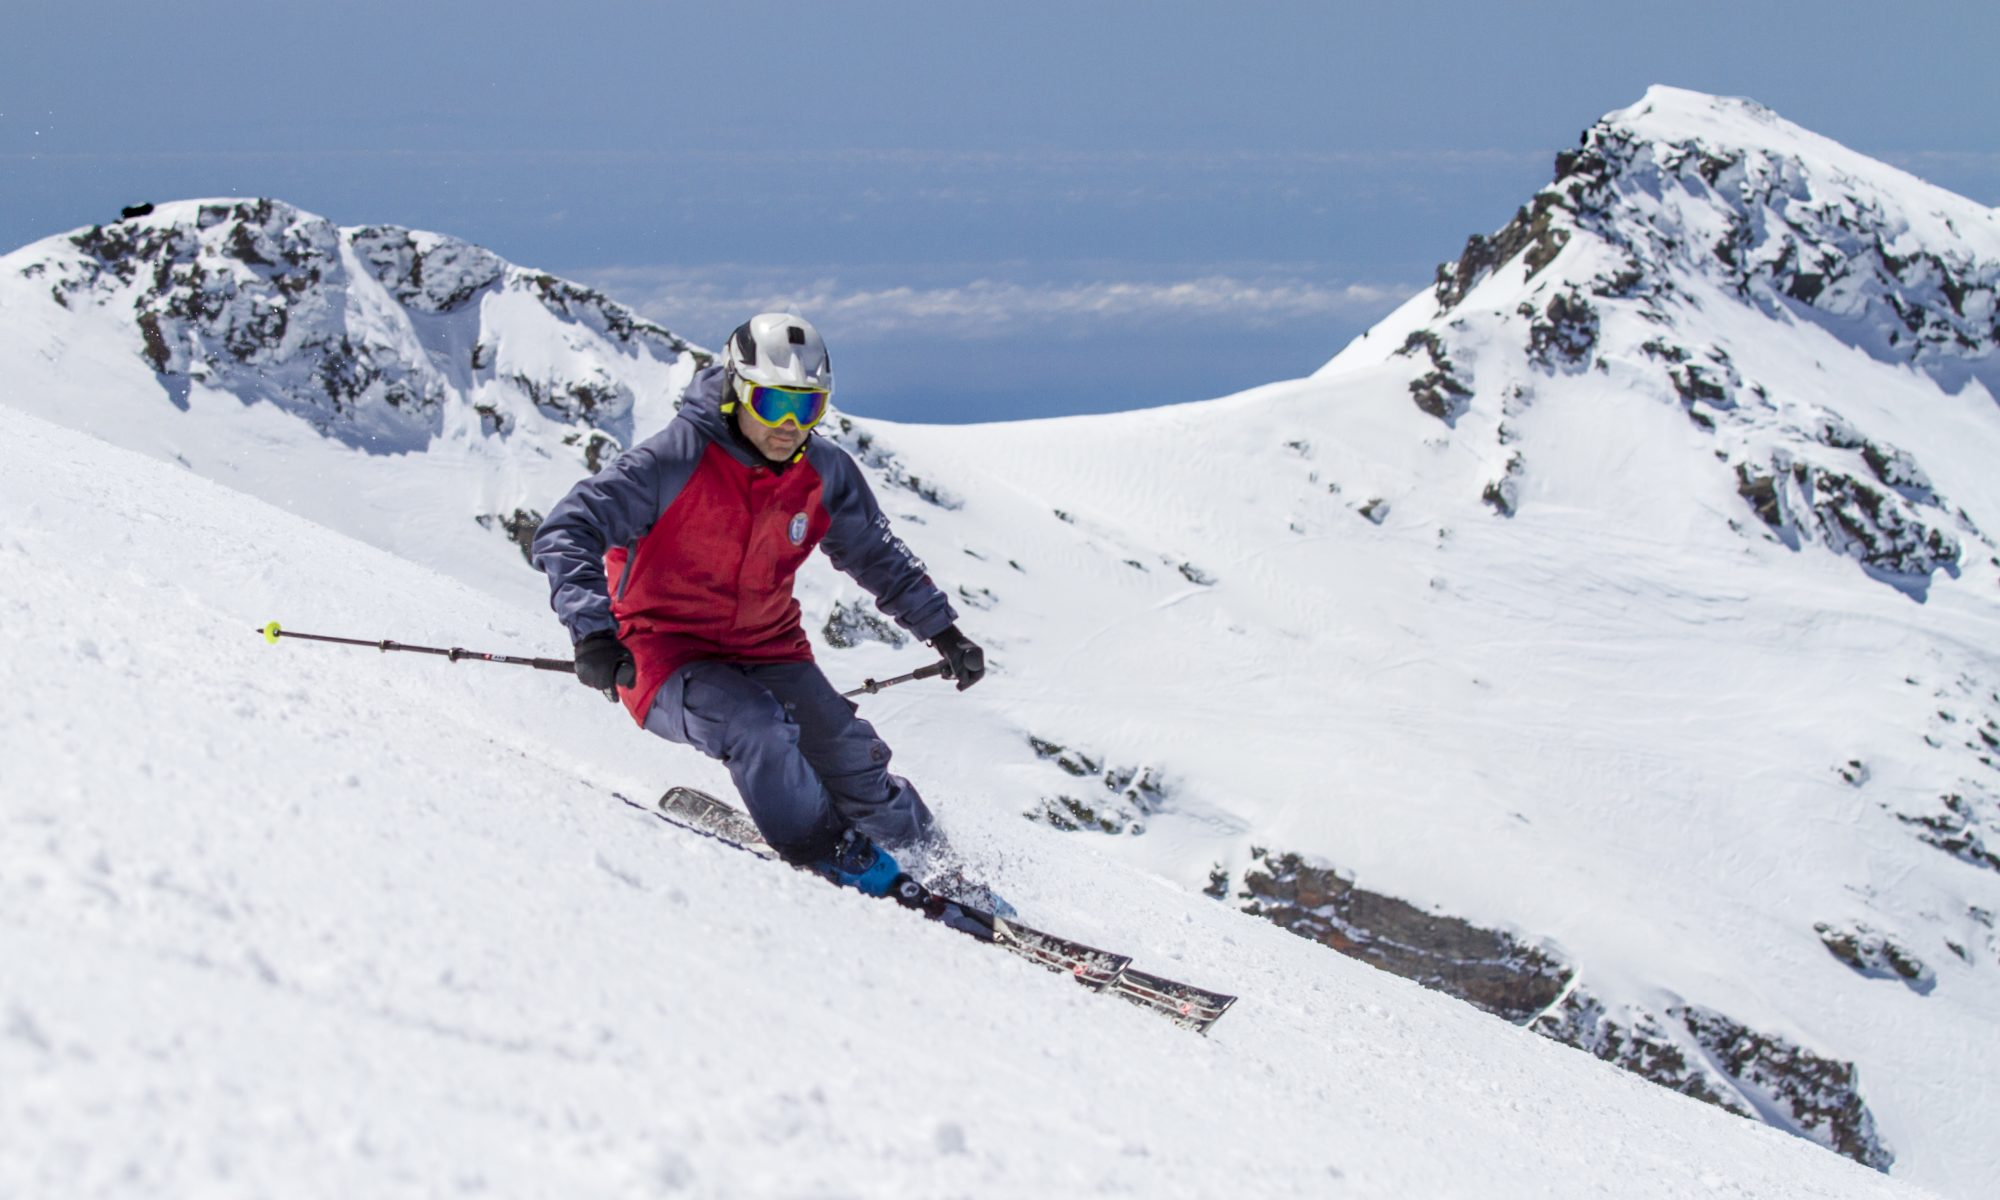 Sierra Nevada is having its pistes opened until May 6th.